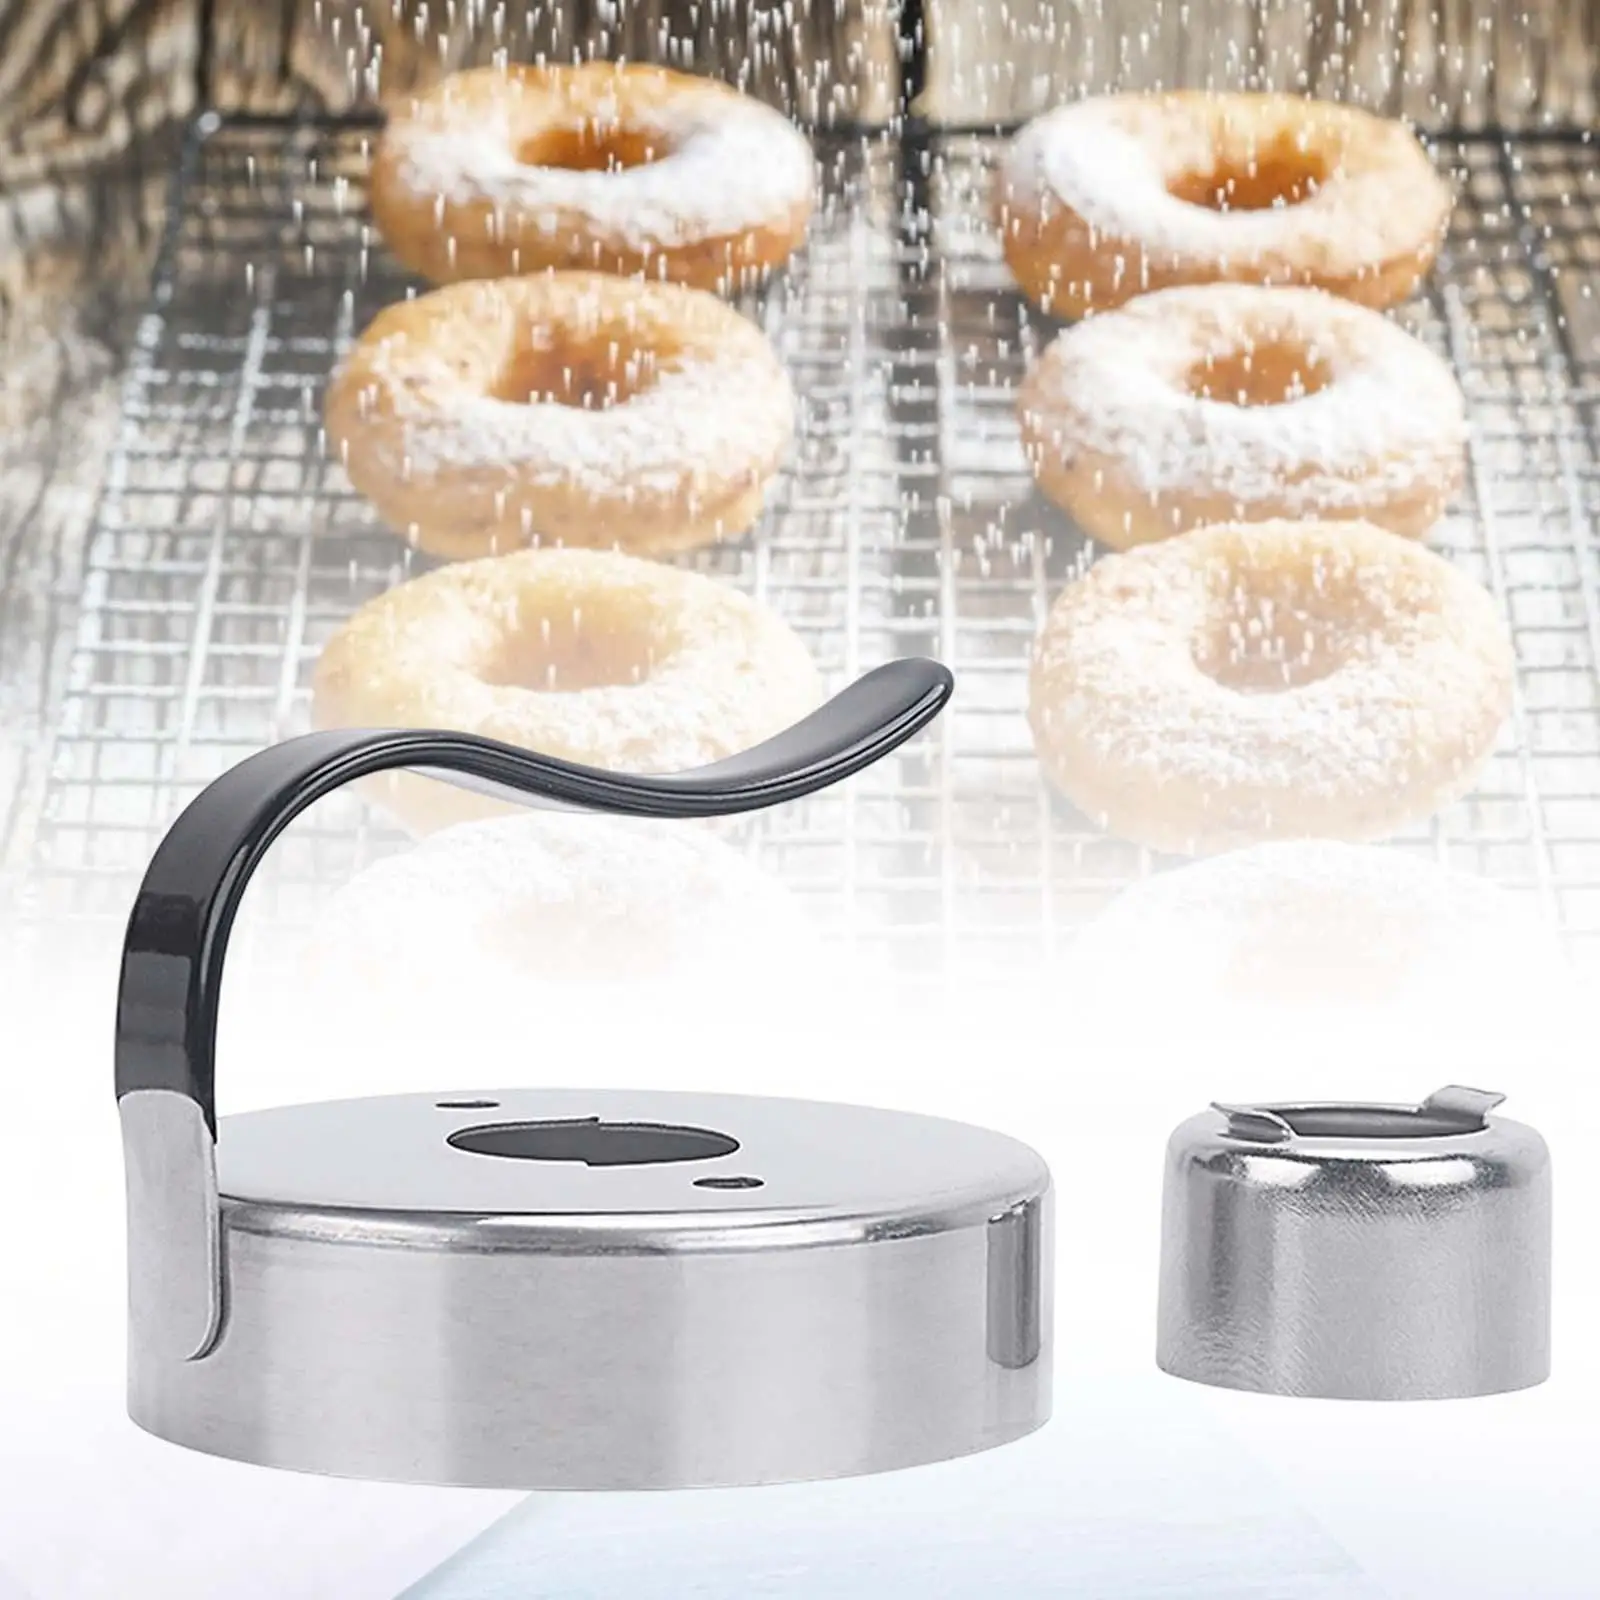 Mousse Circle, Easy to Clean Round Pastry Mousse Muffin mould Cake rings Donut Bakeware, Cake mould, for Cooking Family Baking